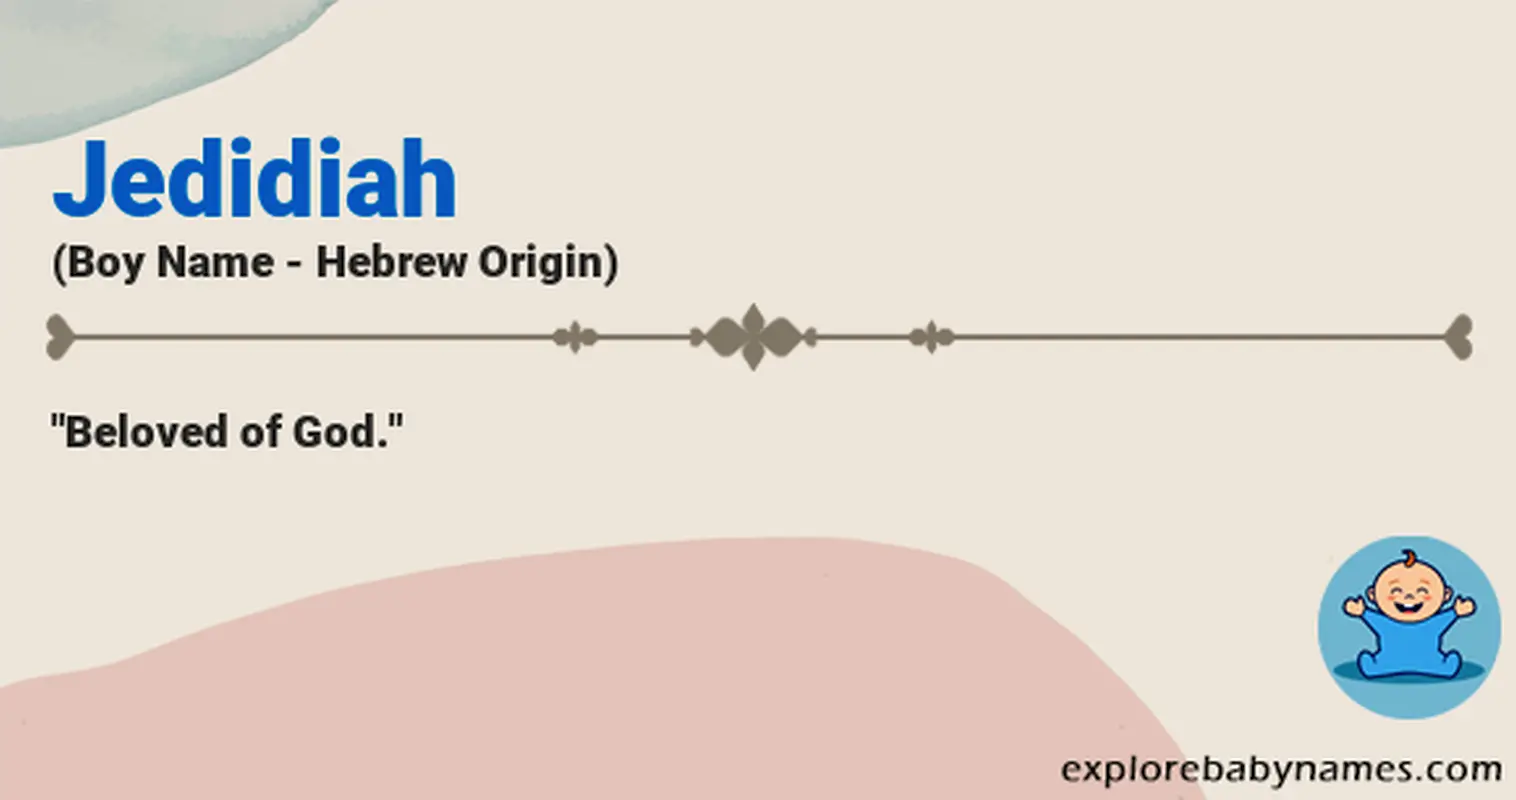 Meaning of Jedidiah